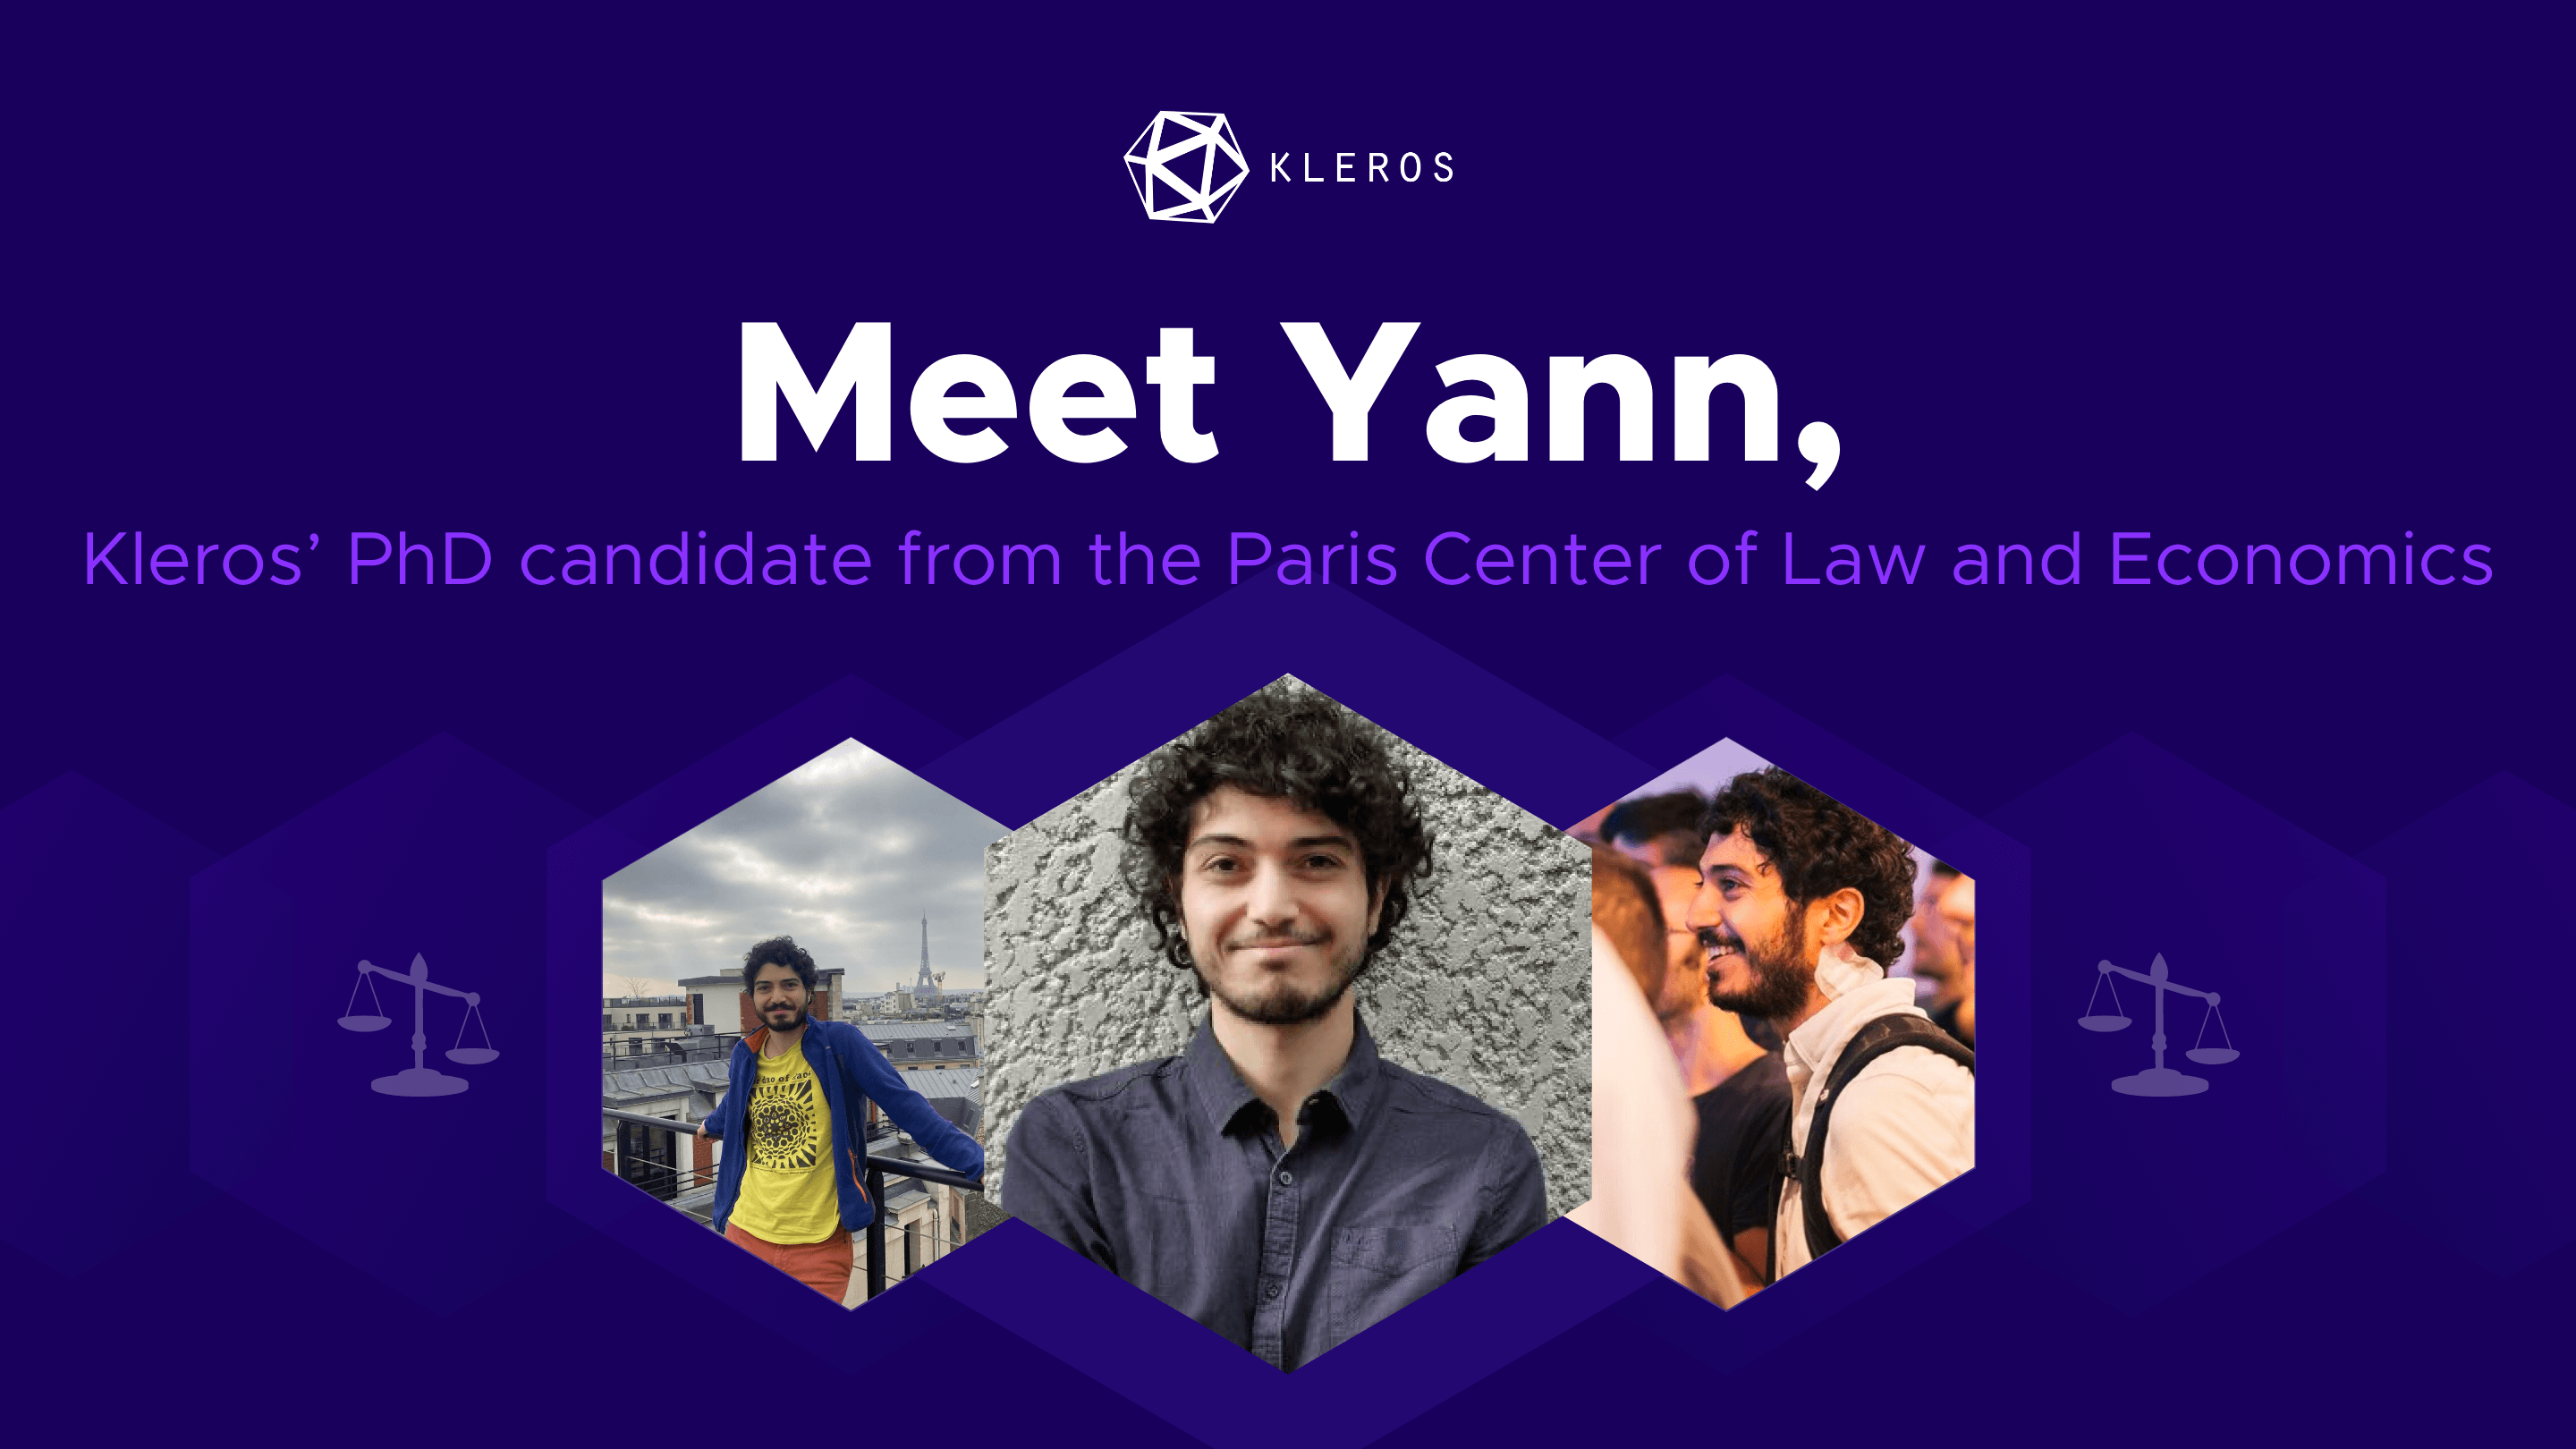 Meet Yann, Kleros’ PhD candidate from the Paris Center of Law and Economics